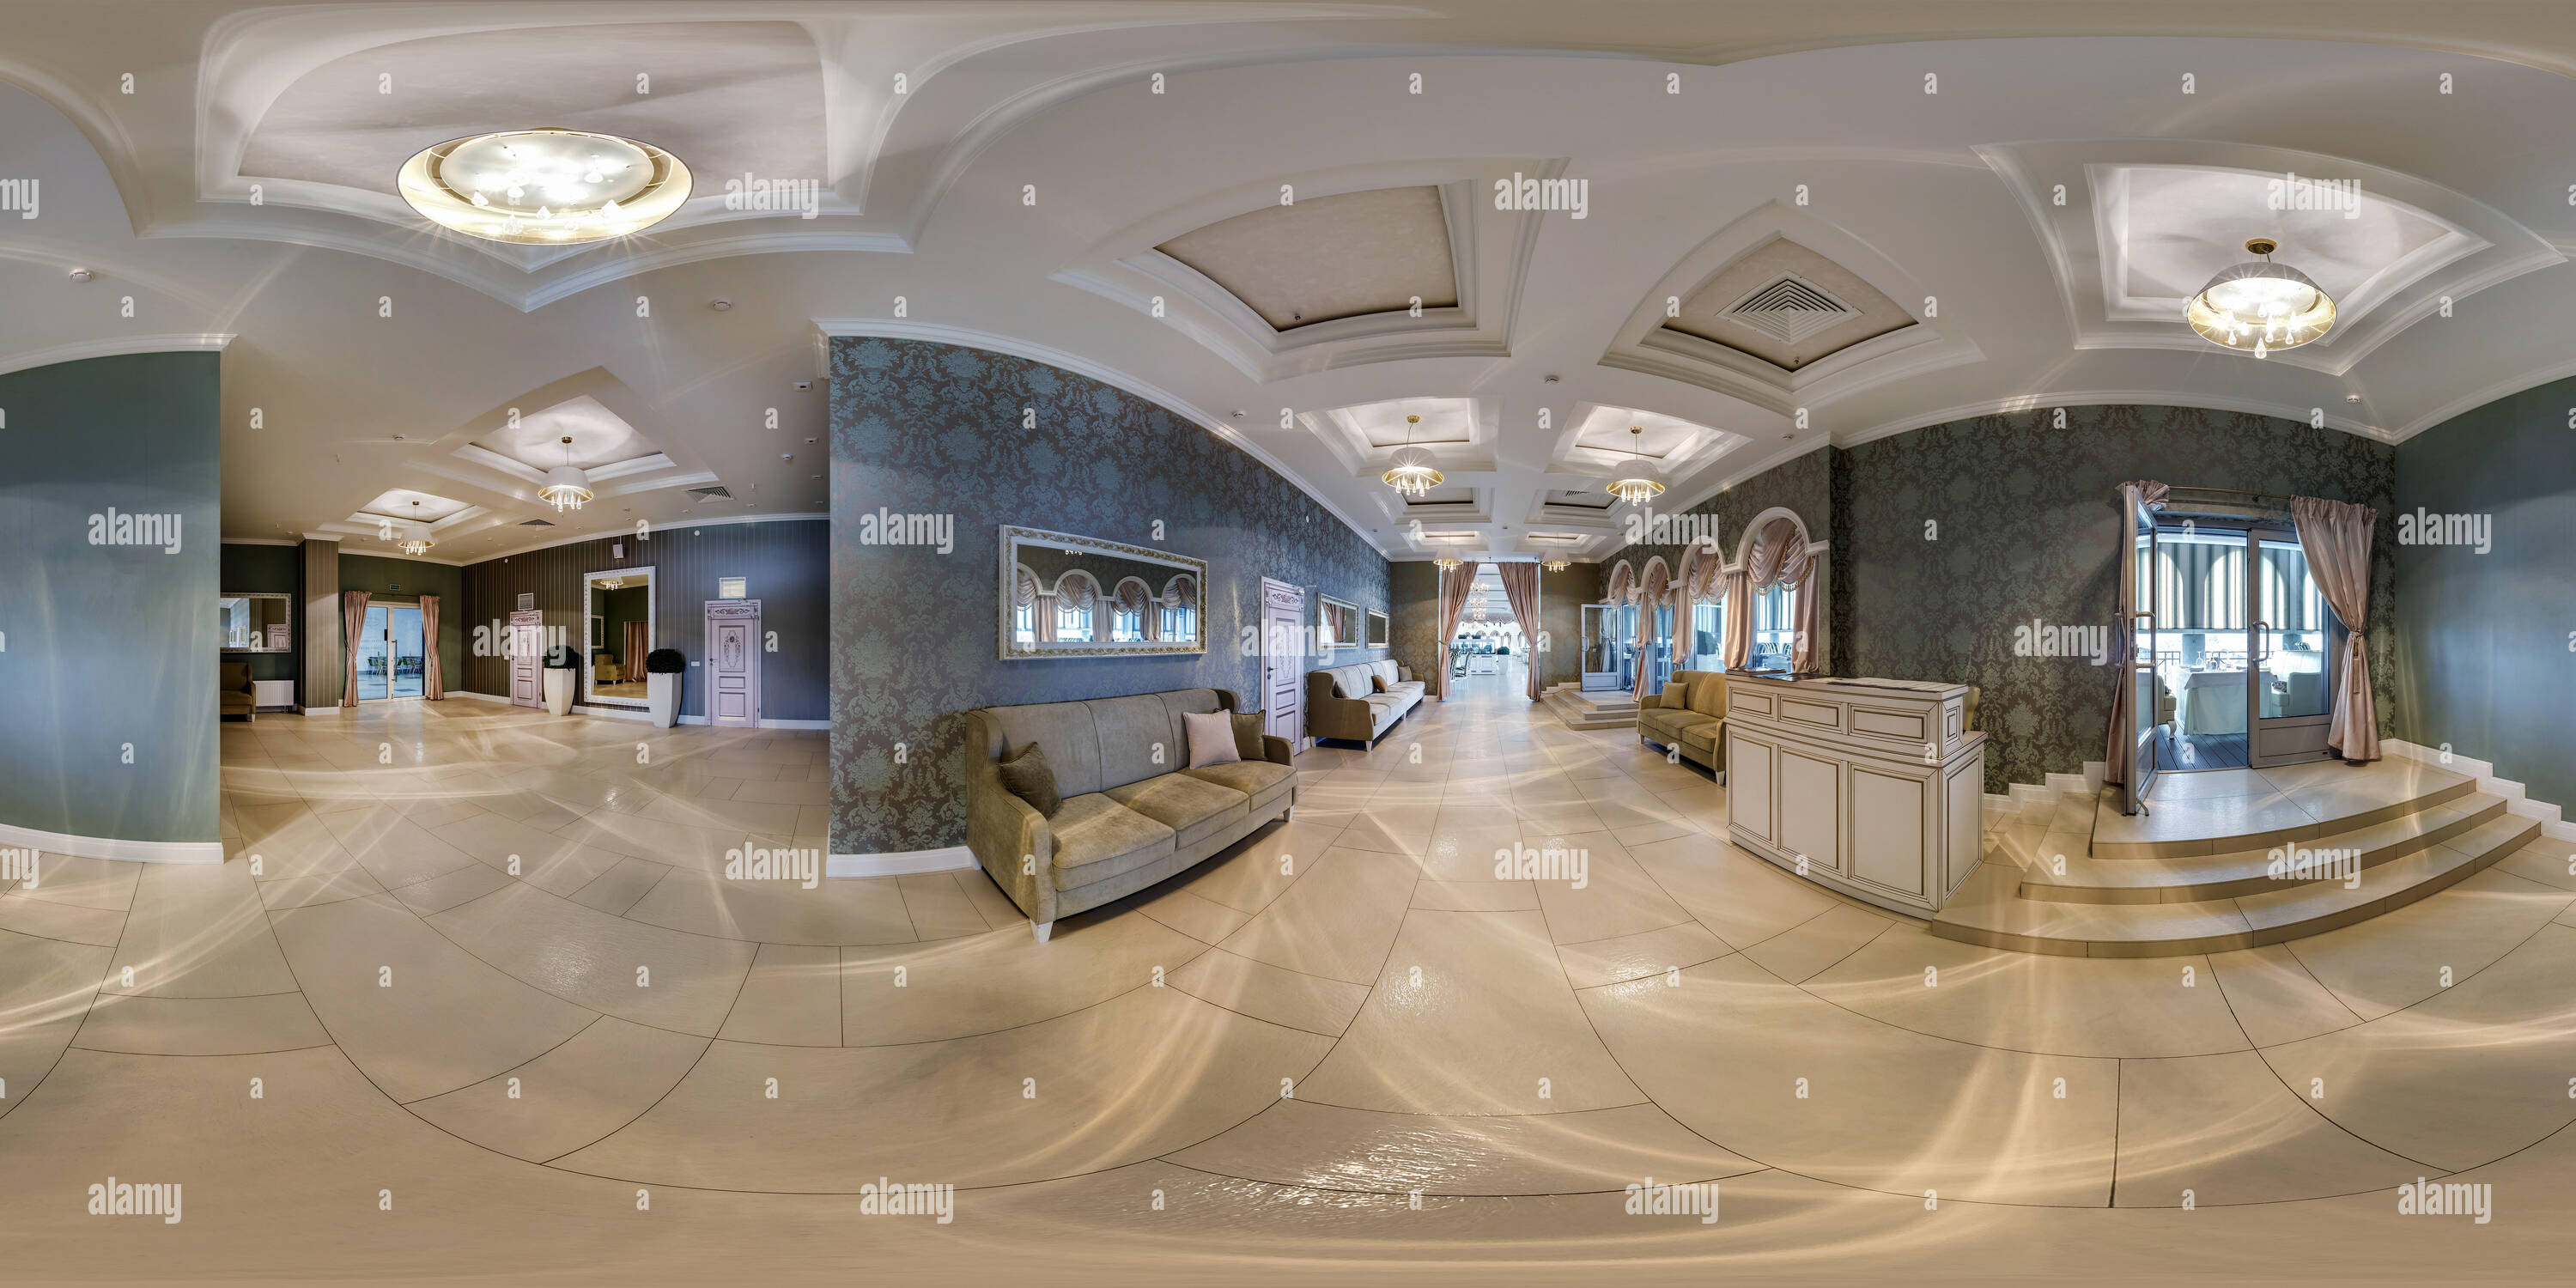 360 degree panoramic view of MINSK , BELARUS - JUNE 23, 2015: Inside of the interior of luxury stylish restaurant Belvedere. Full 360 by 180 degree seamless panorama in equirectan